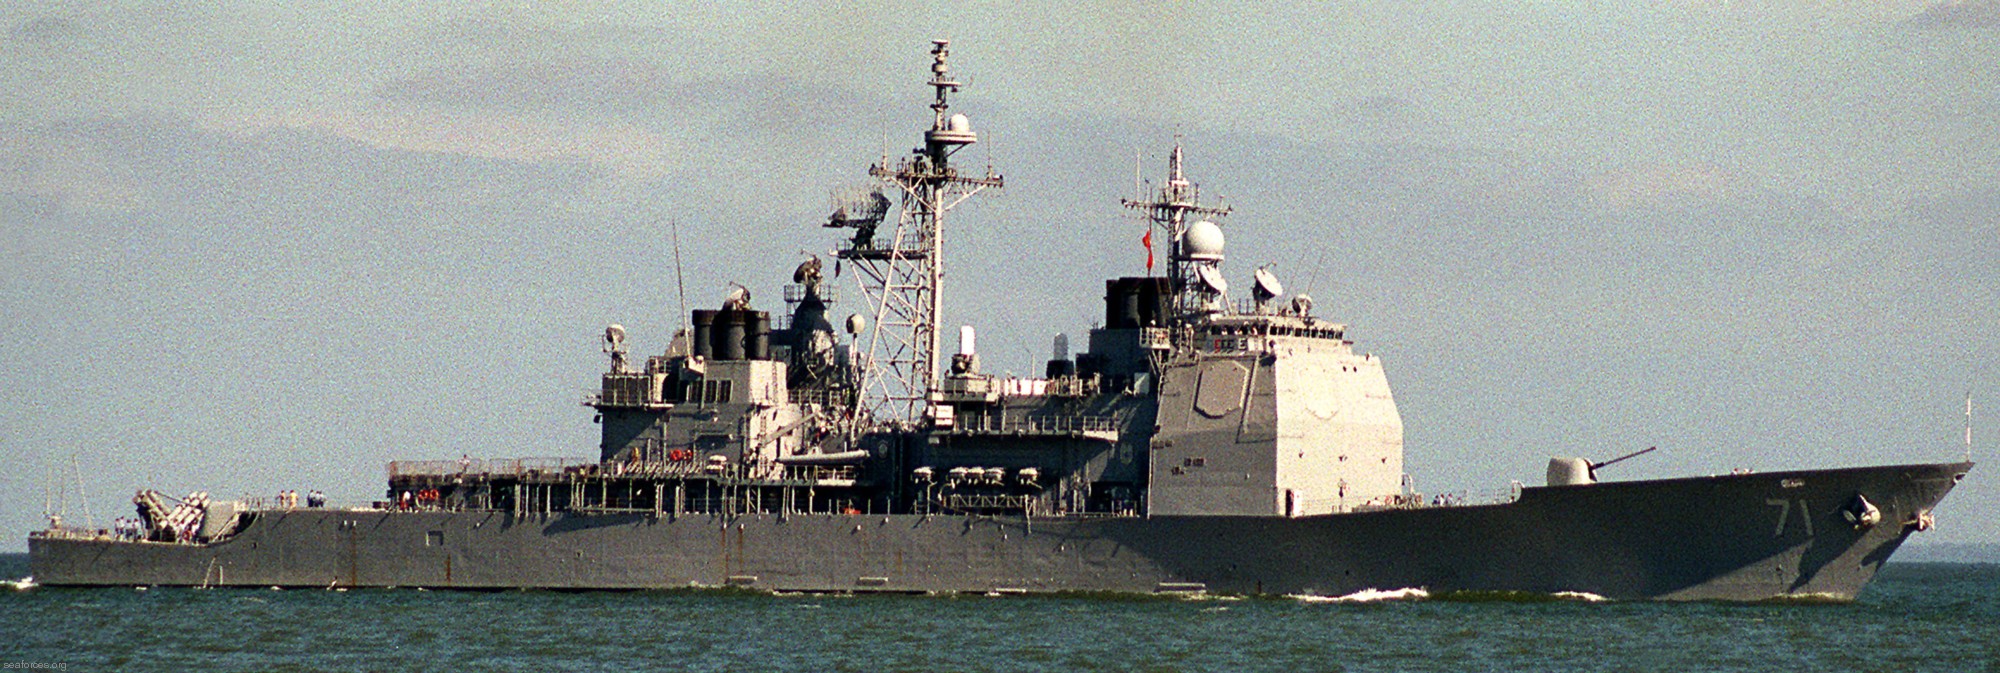 cg-71 uss cape st. george ticonderoga class guided missile cruiser us navy 74